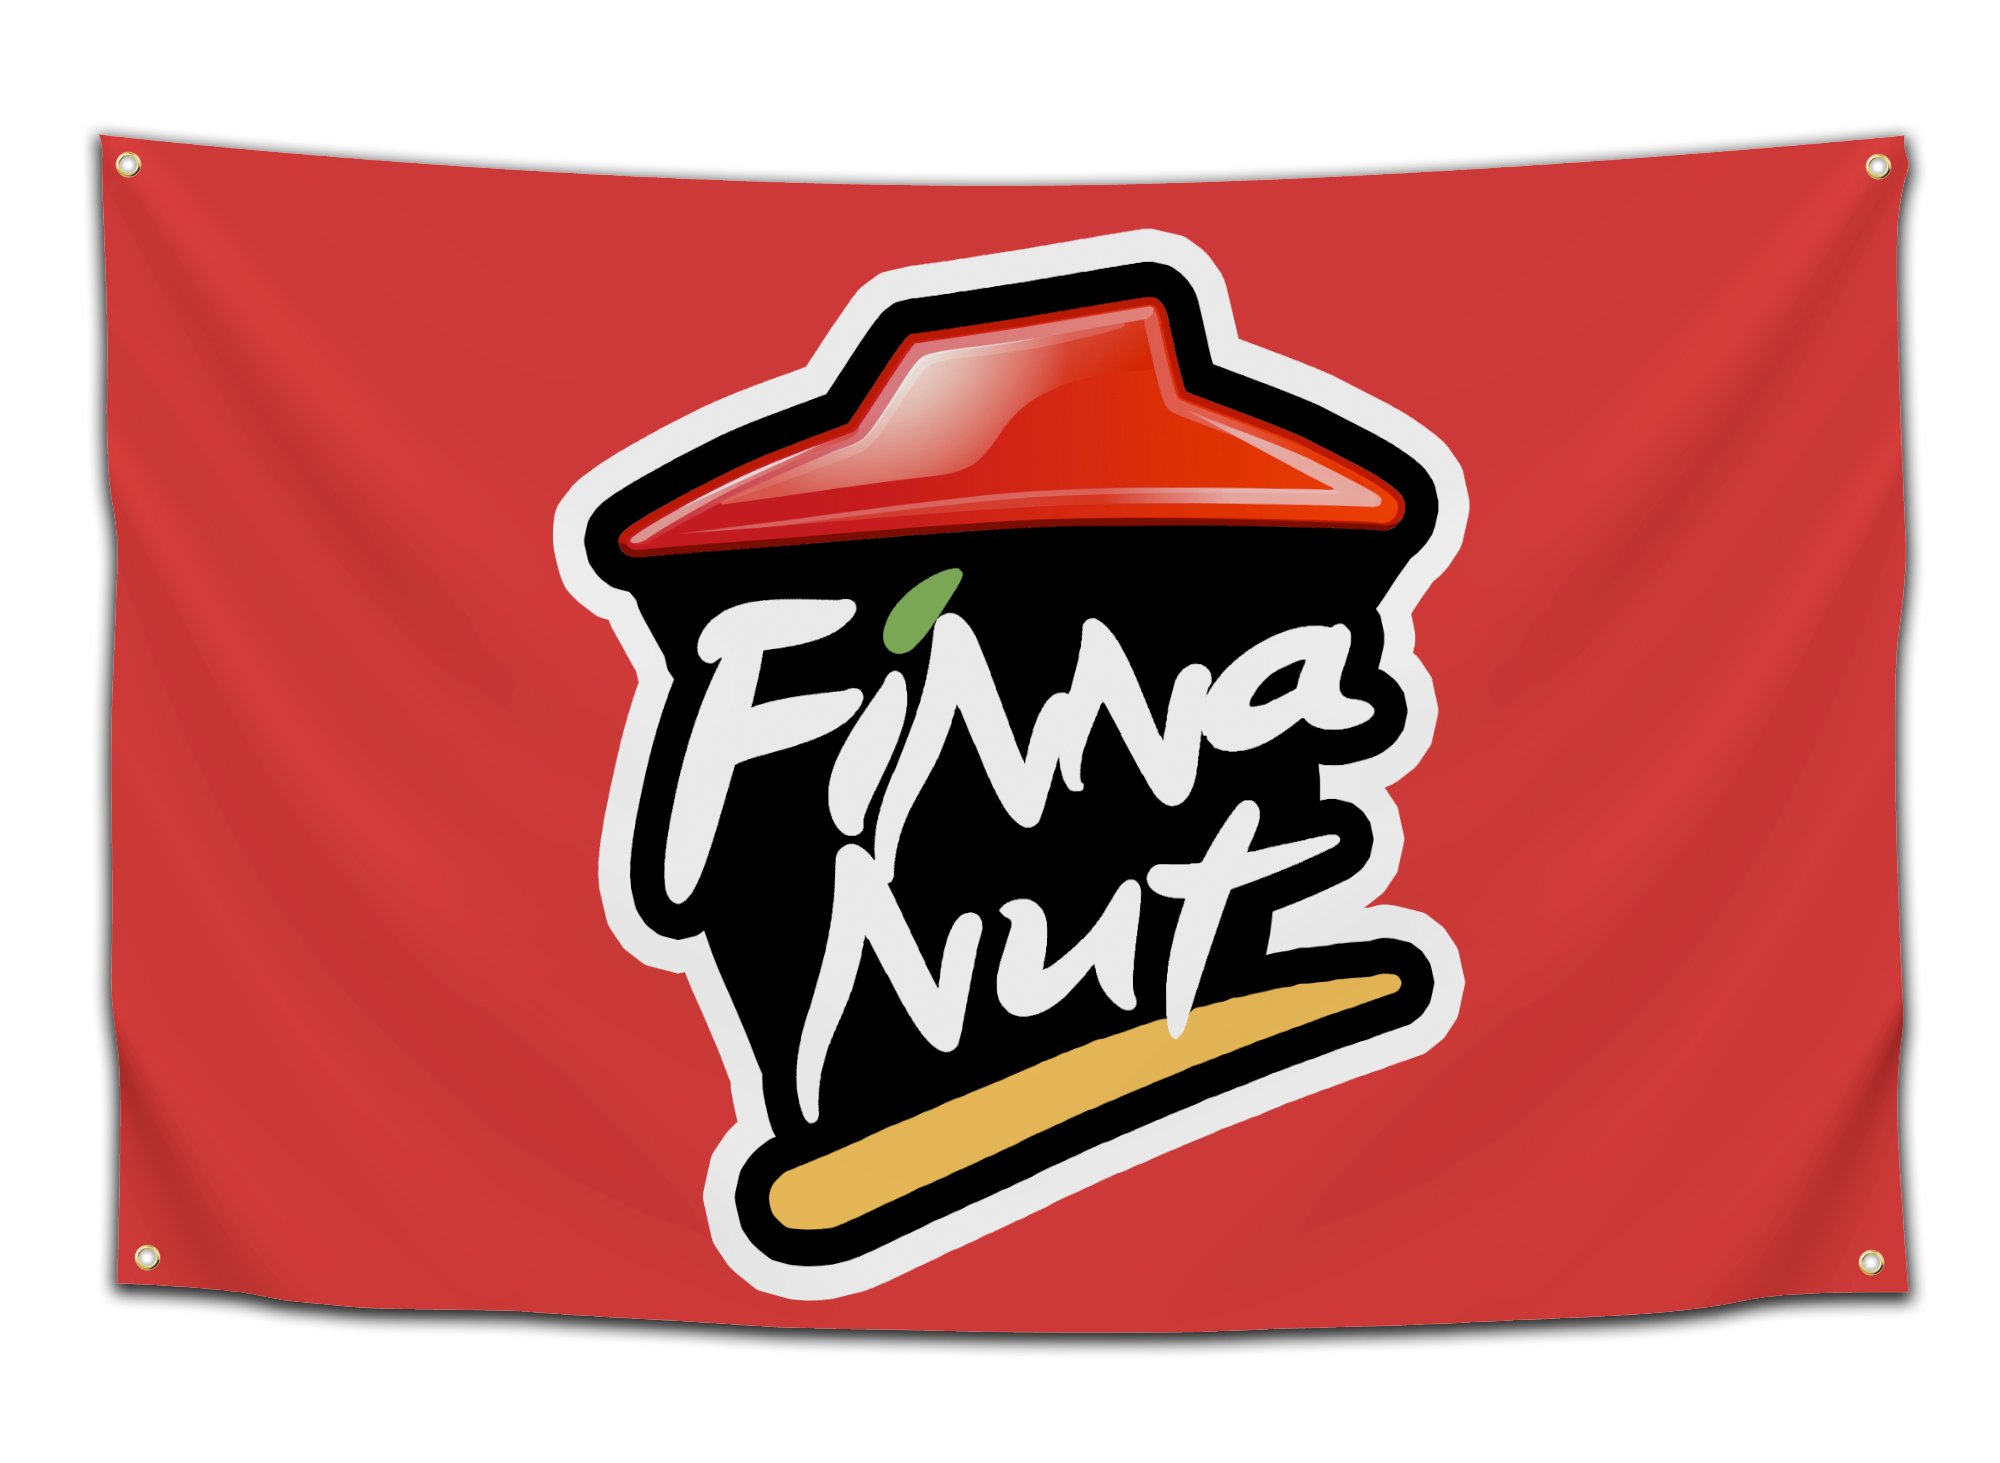 arnel bello recommends What Does Finna Nut Mean